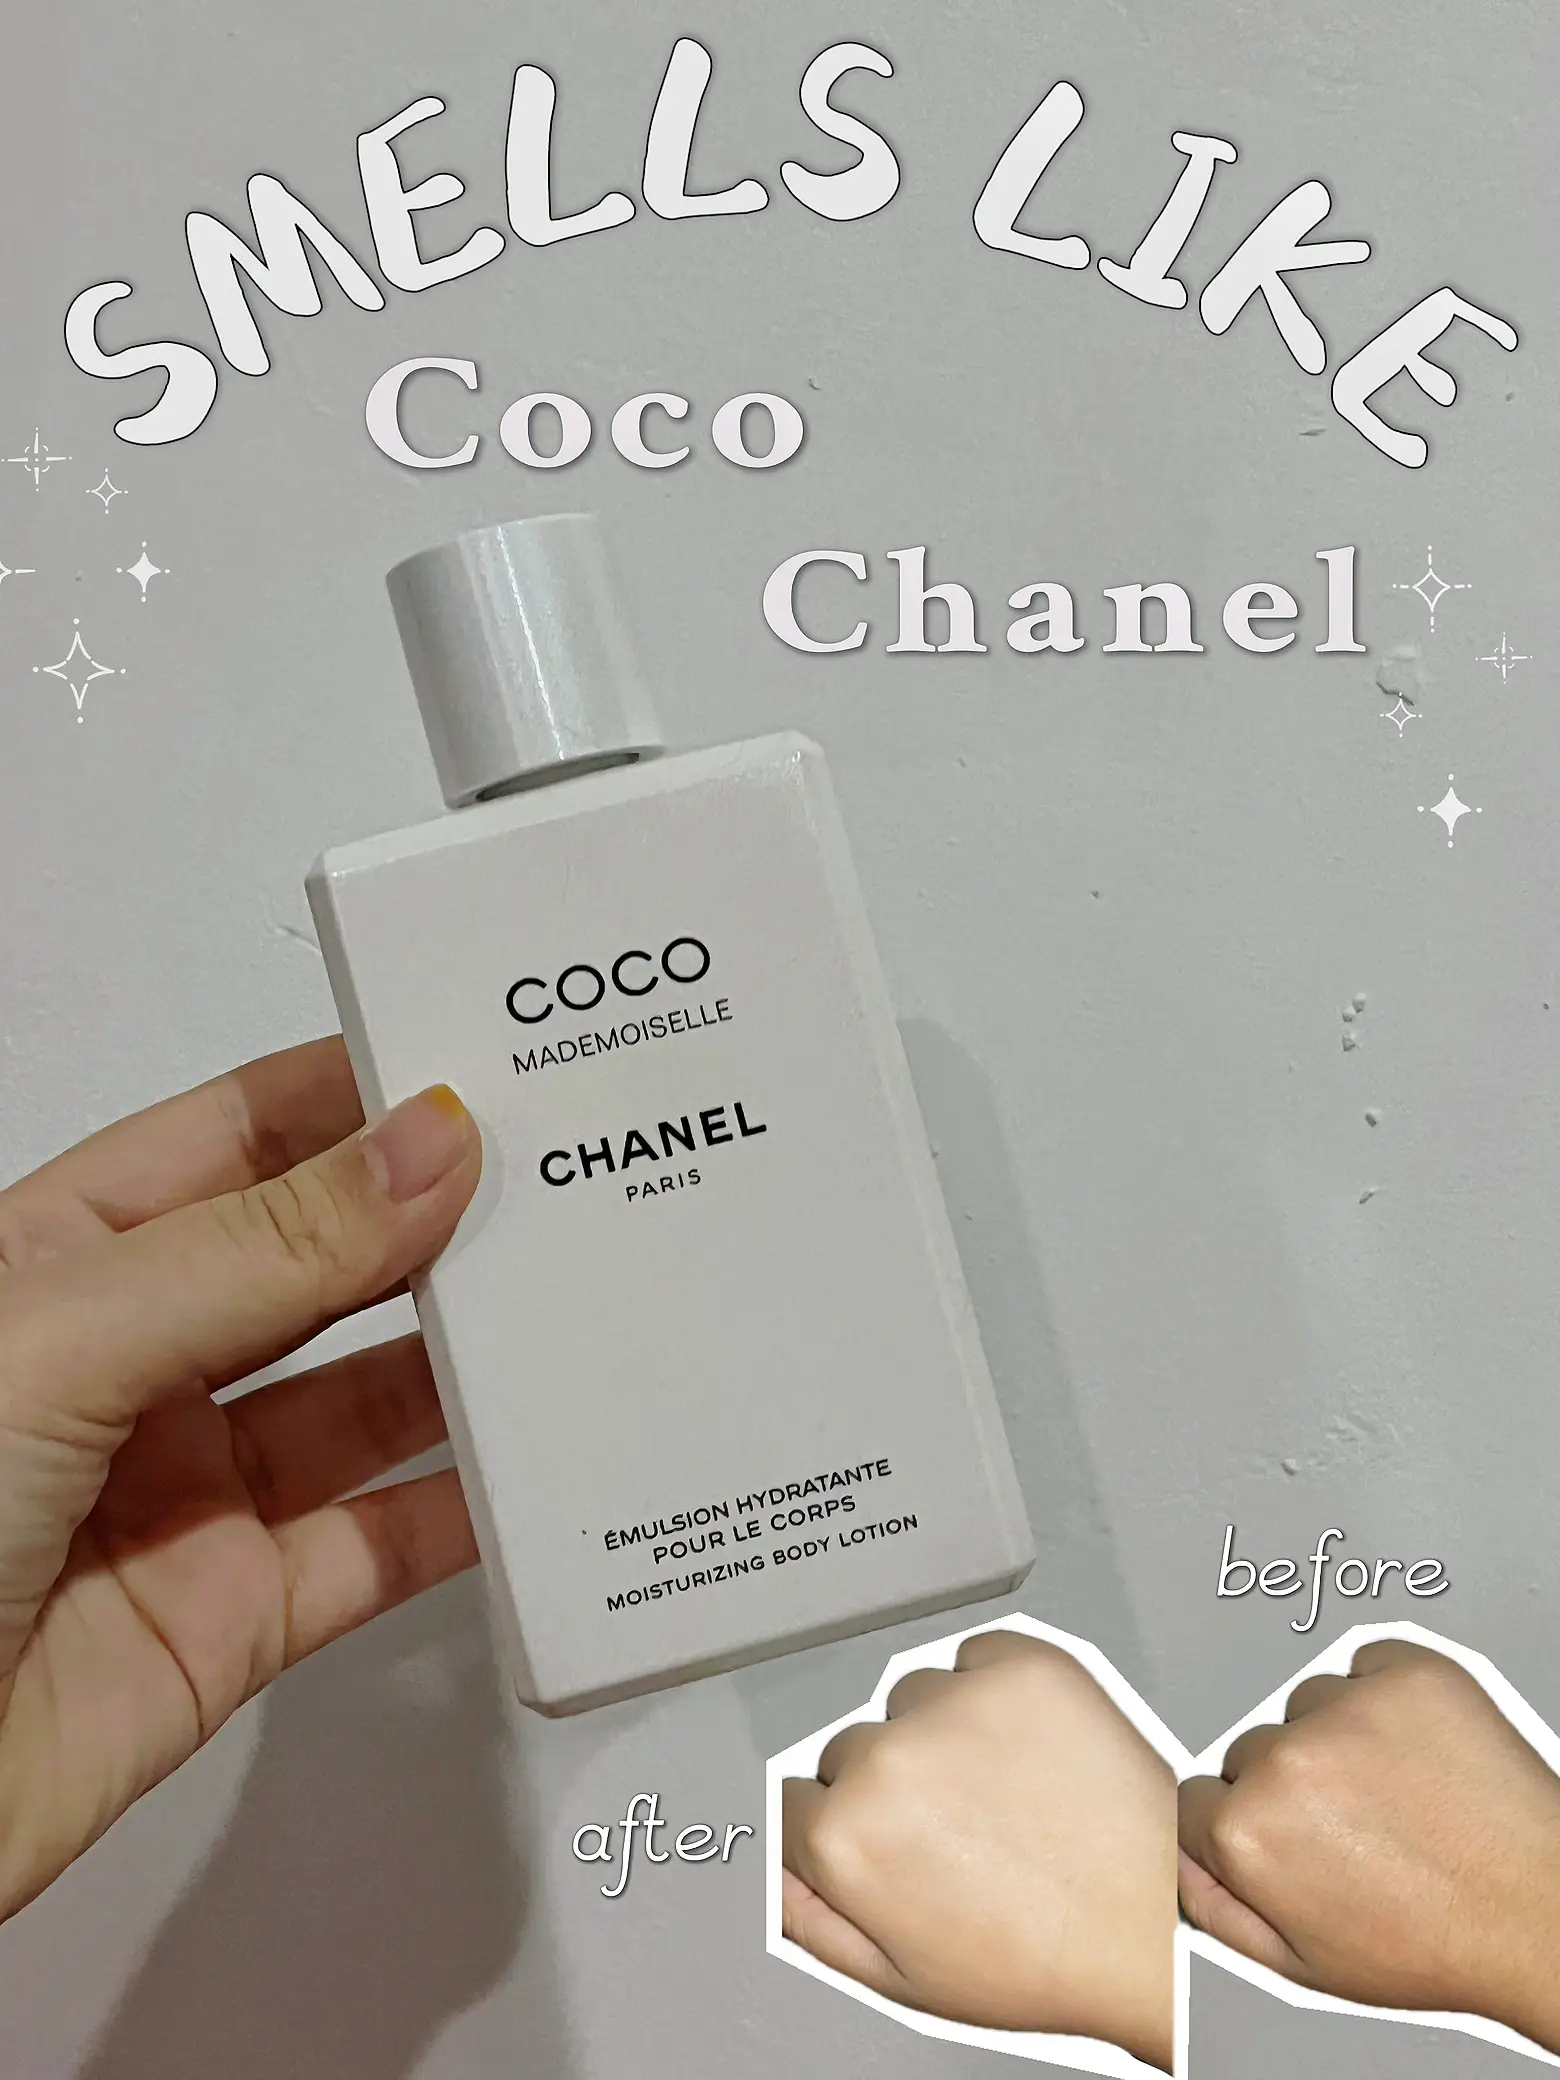 Smells Like Coco Chanel, Body Lotion